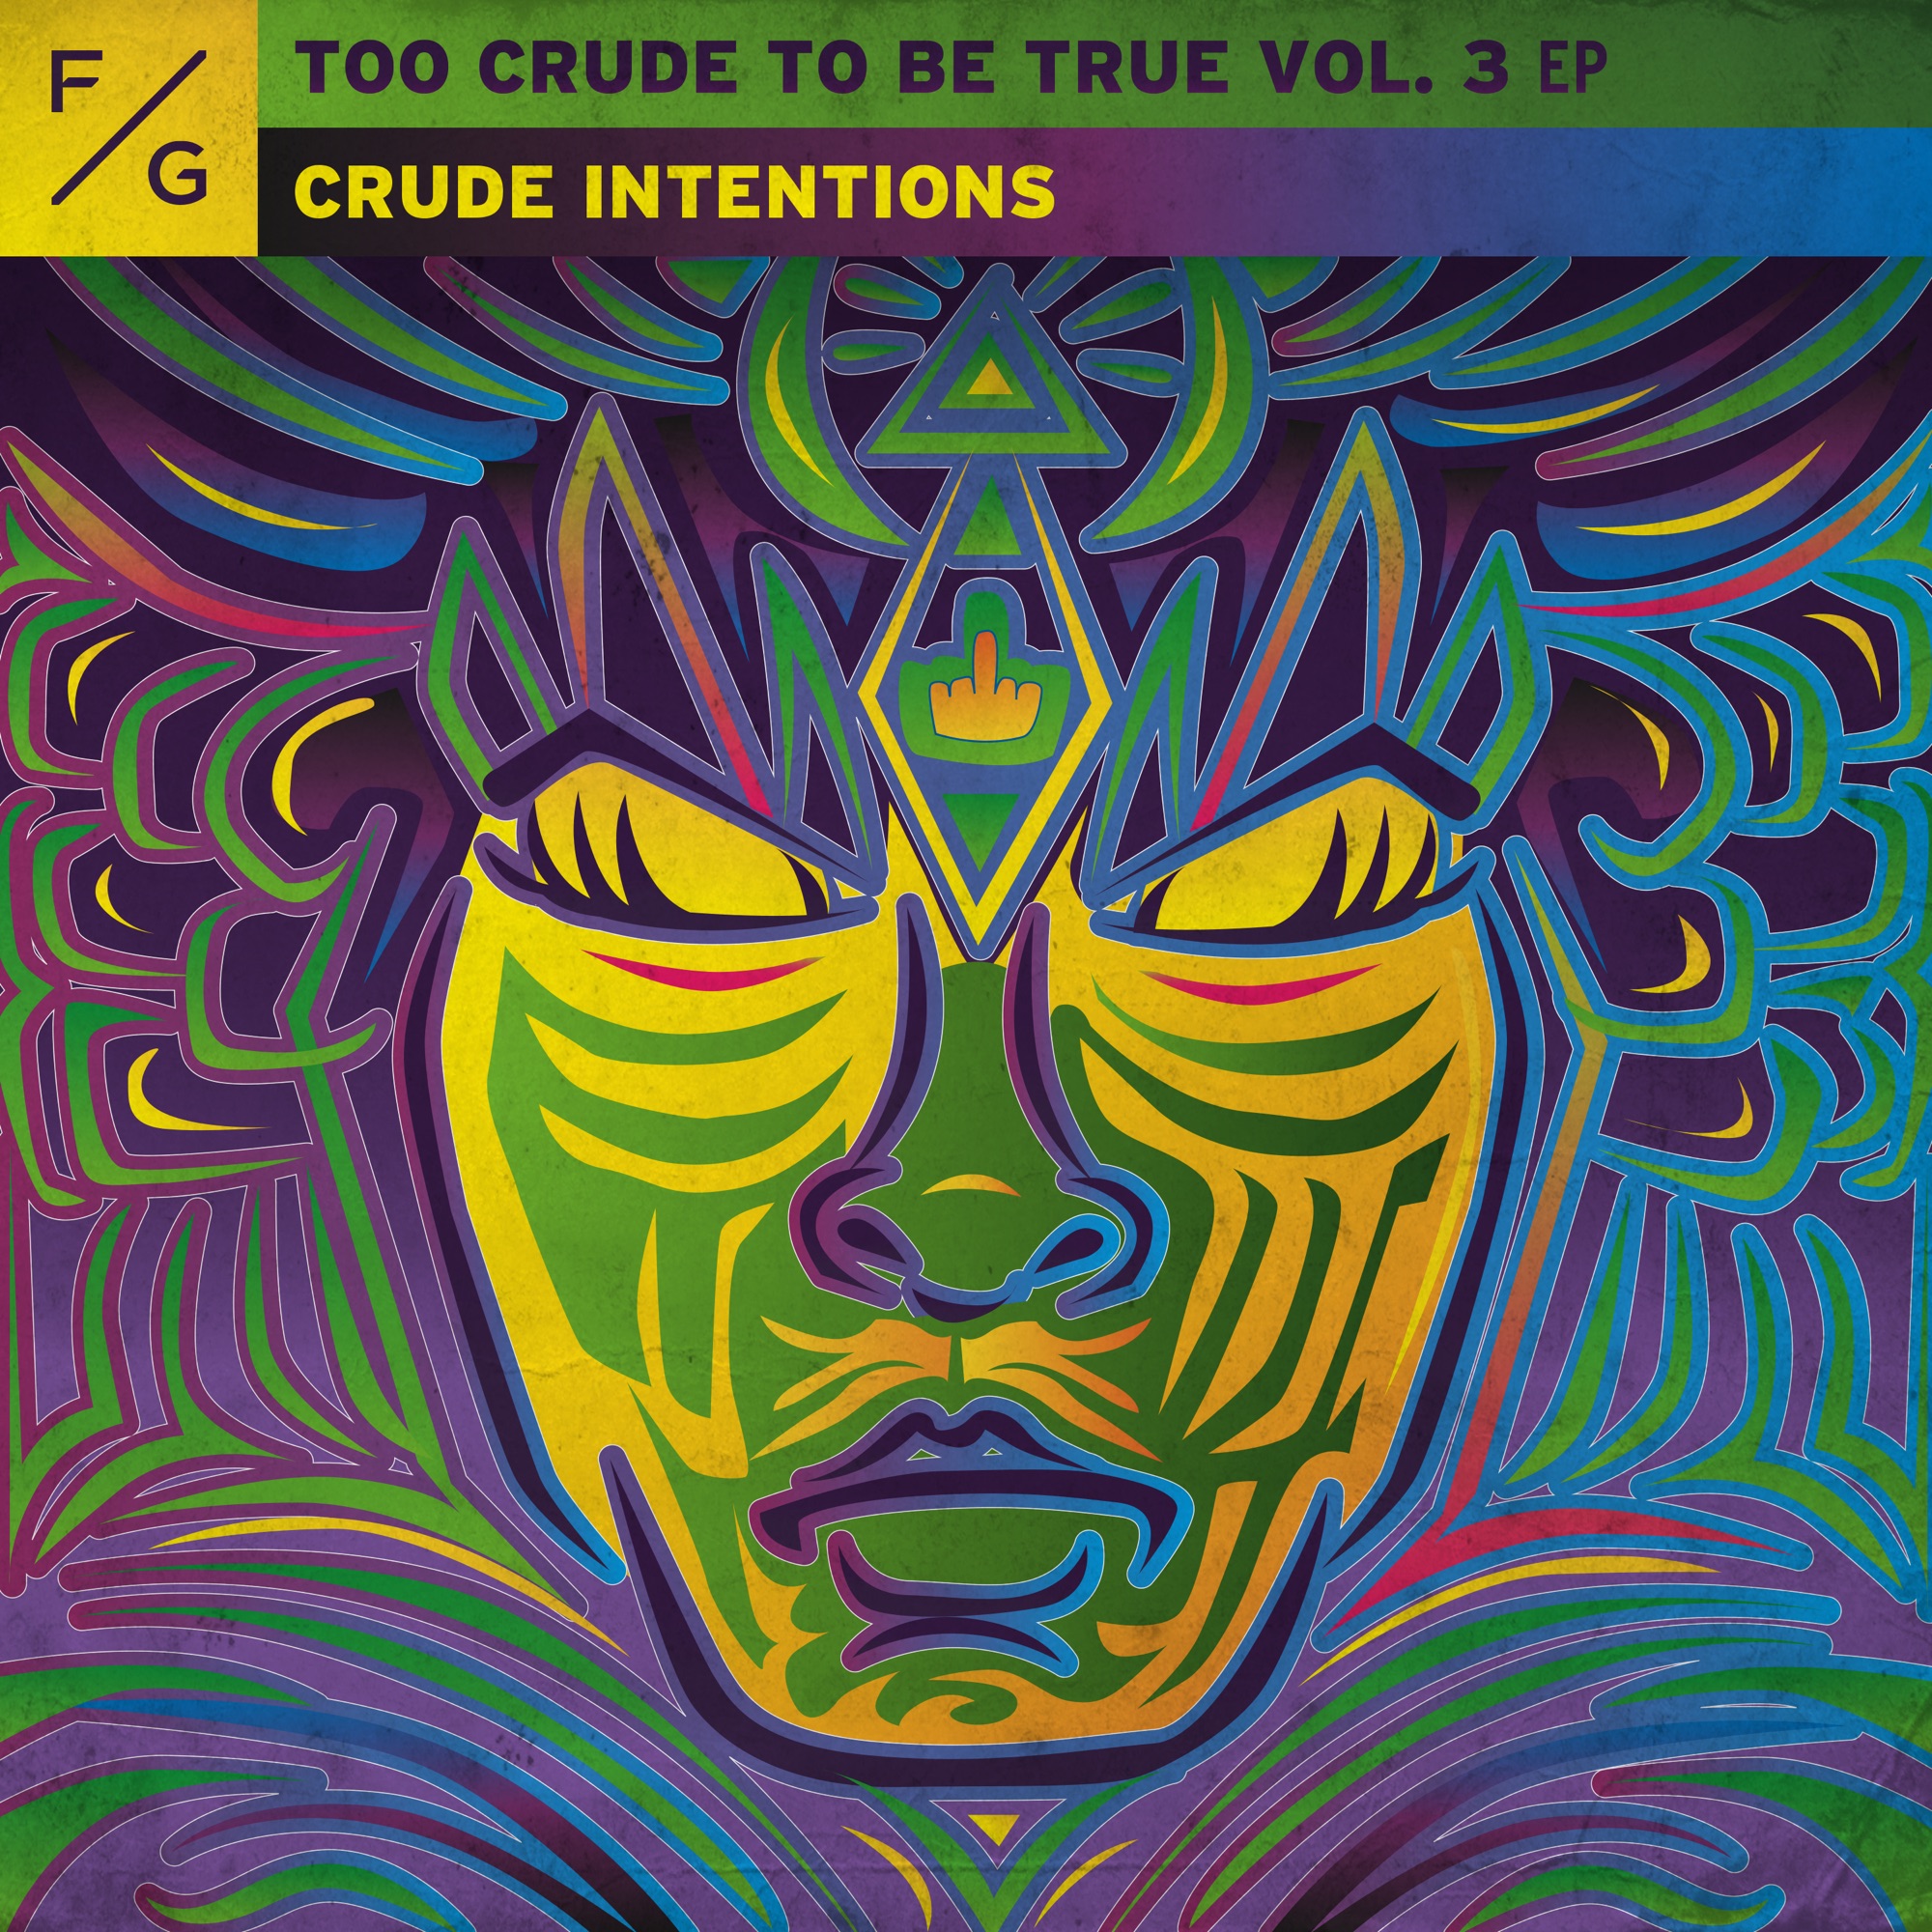 Crude Intentions, Alee & Ransom - Too Crude To Be True Vol.3 EP